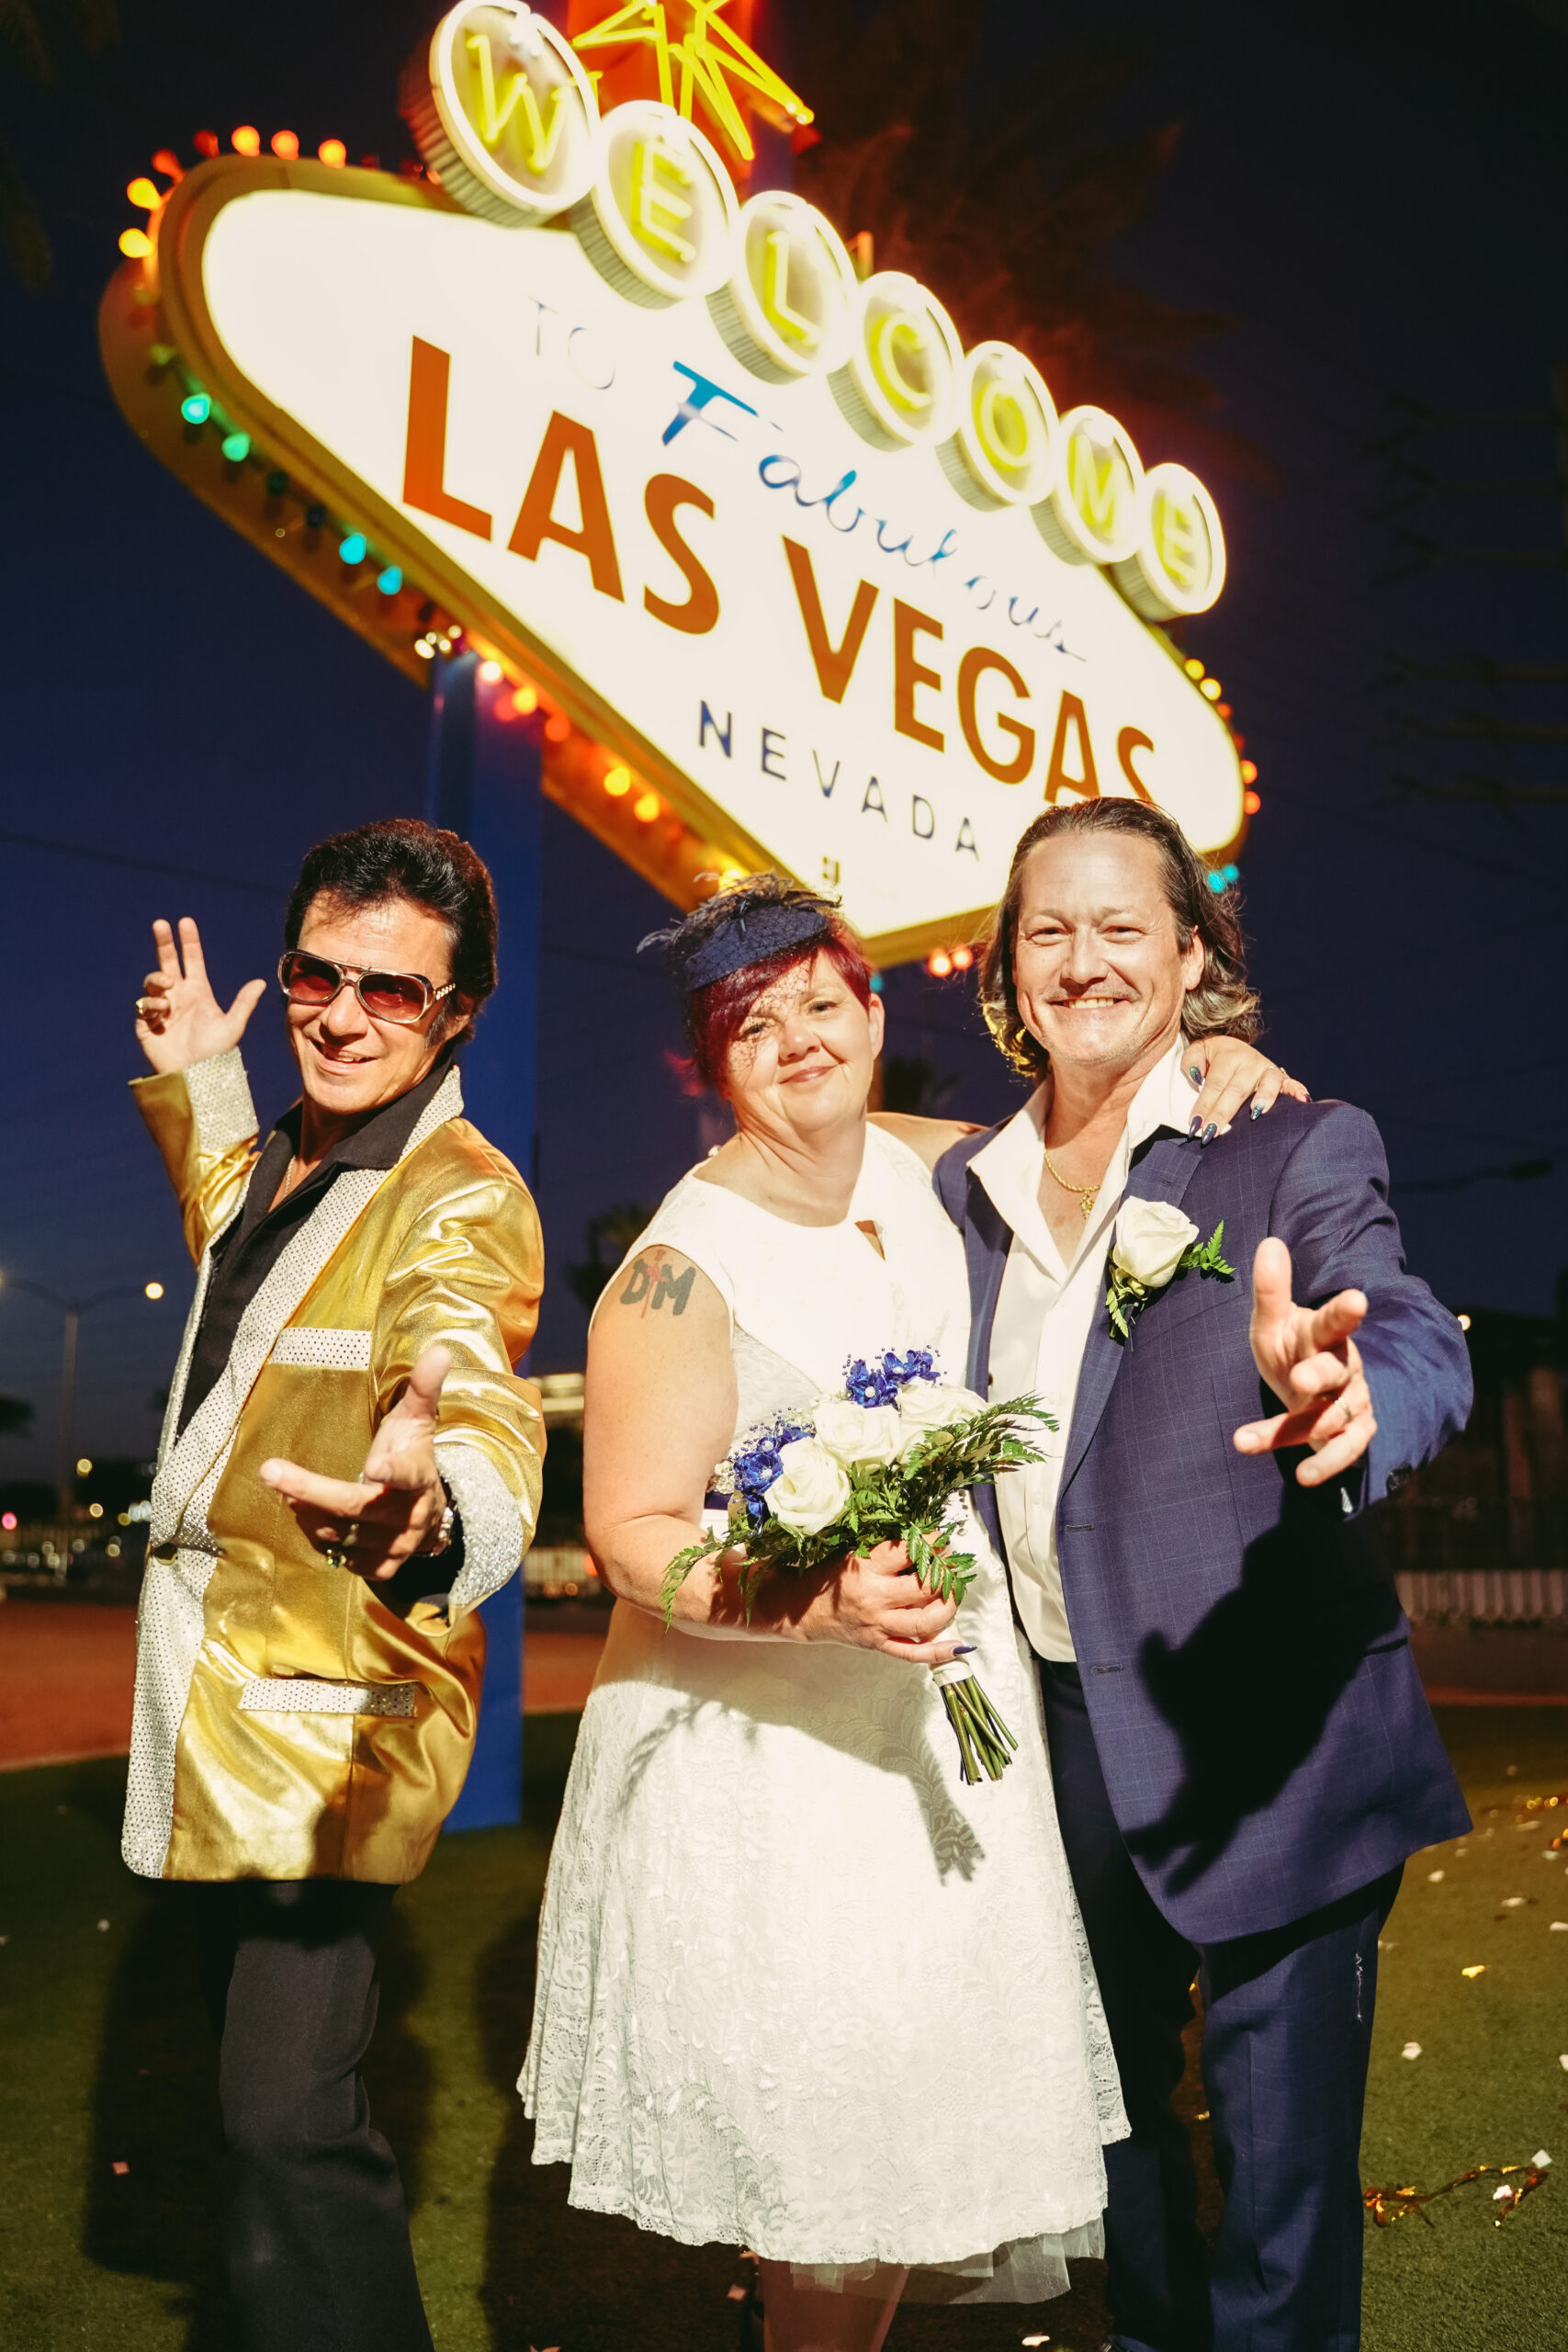 A couple with Elvis impersonator; Elvis-inspired weddings